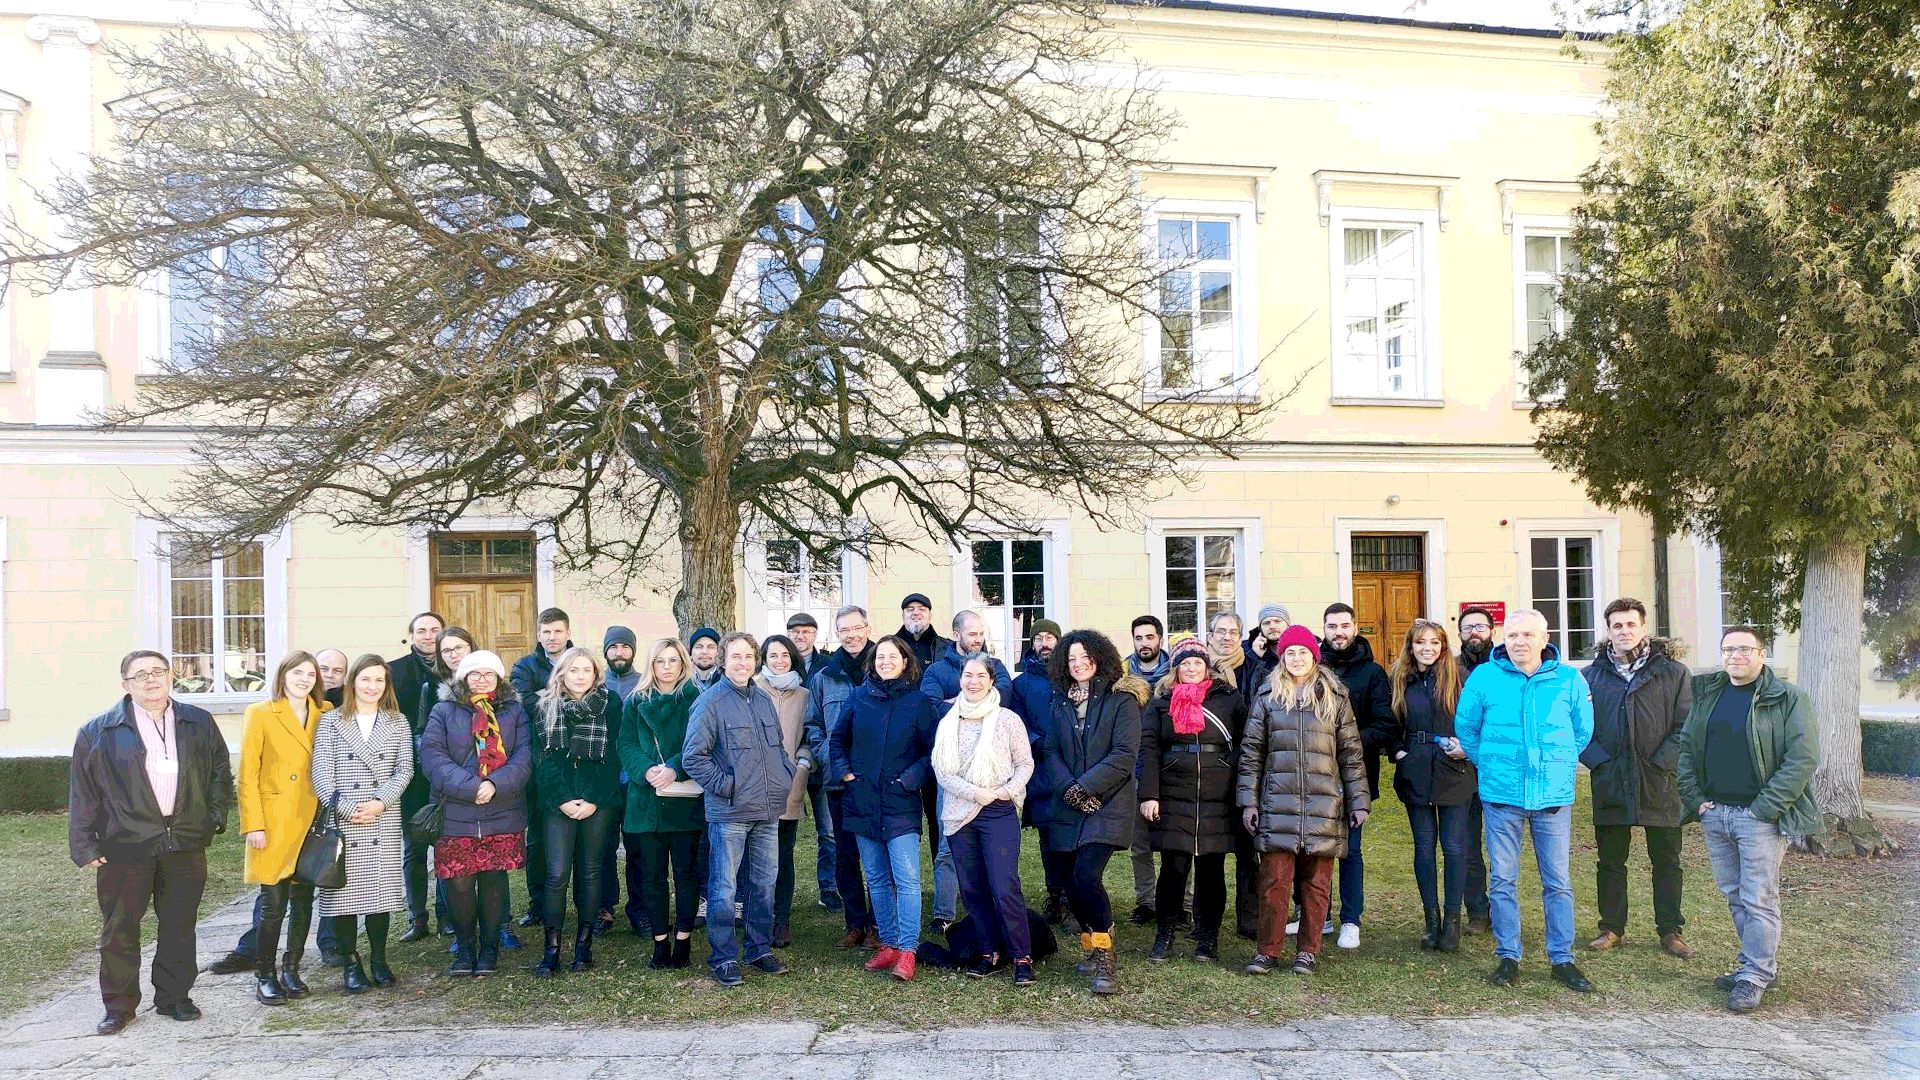 The NBSOIL consortium meets in Puławy, Poland, to kick off the project activities